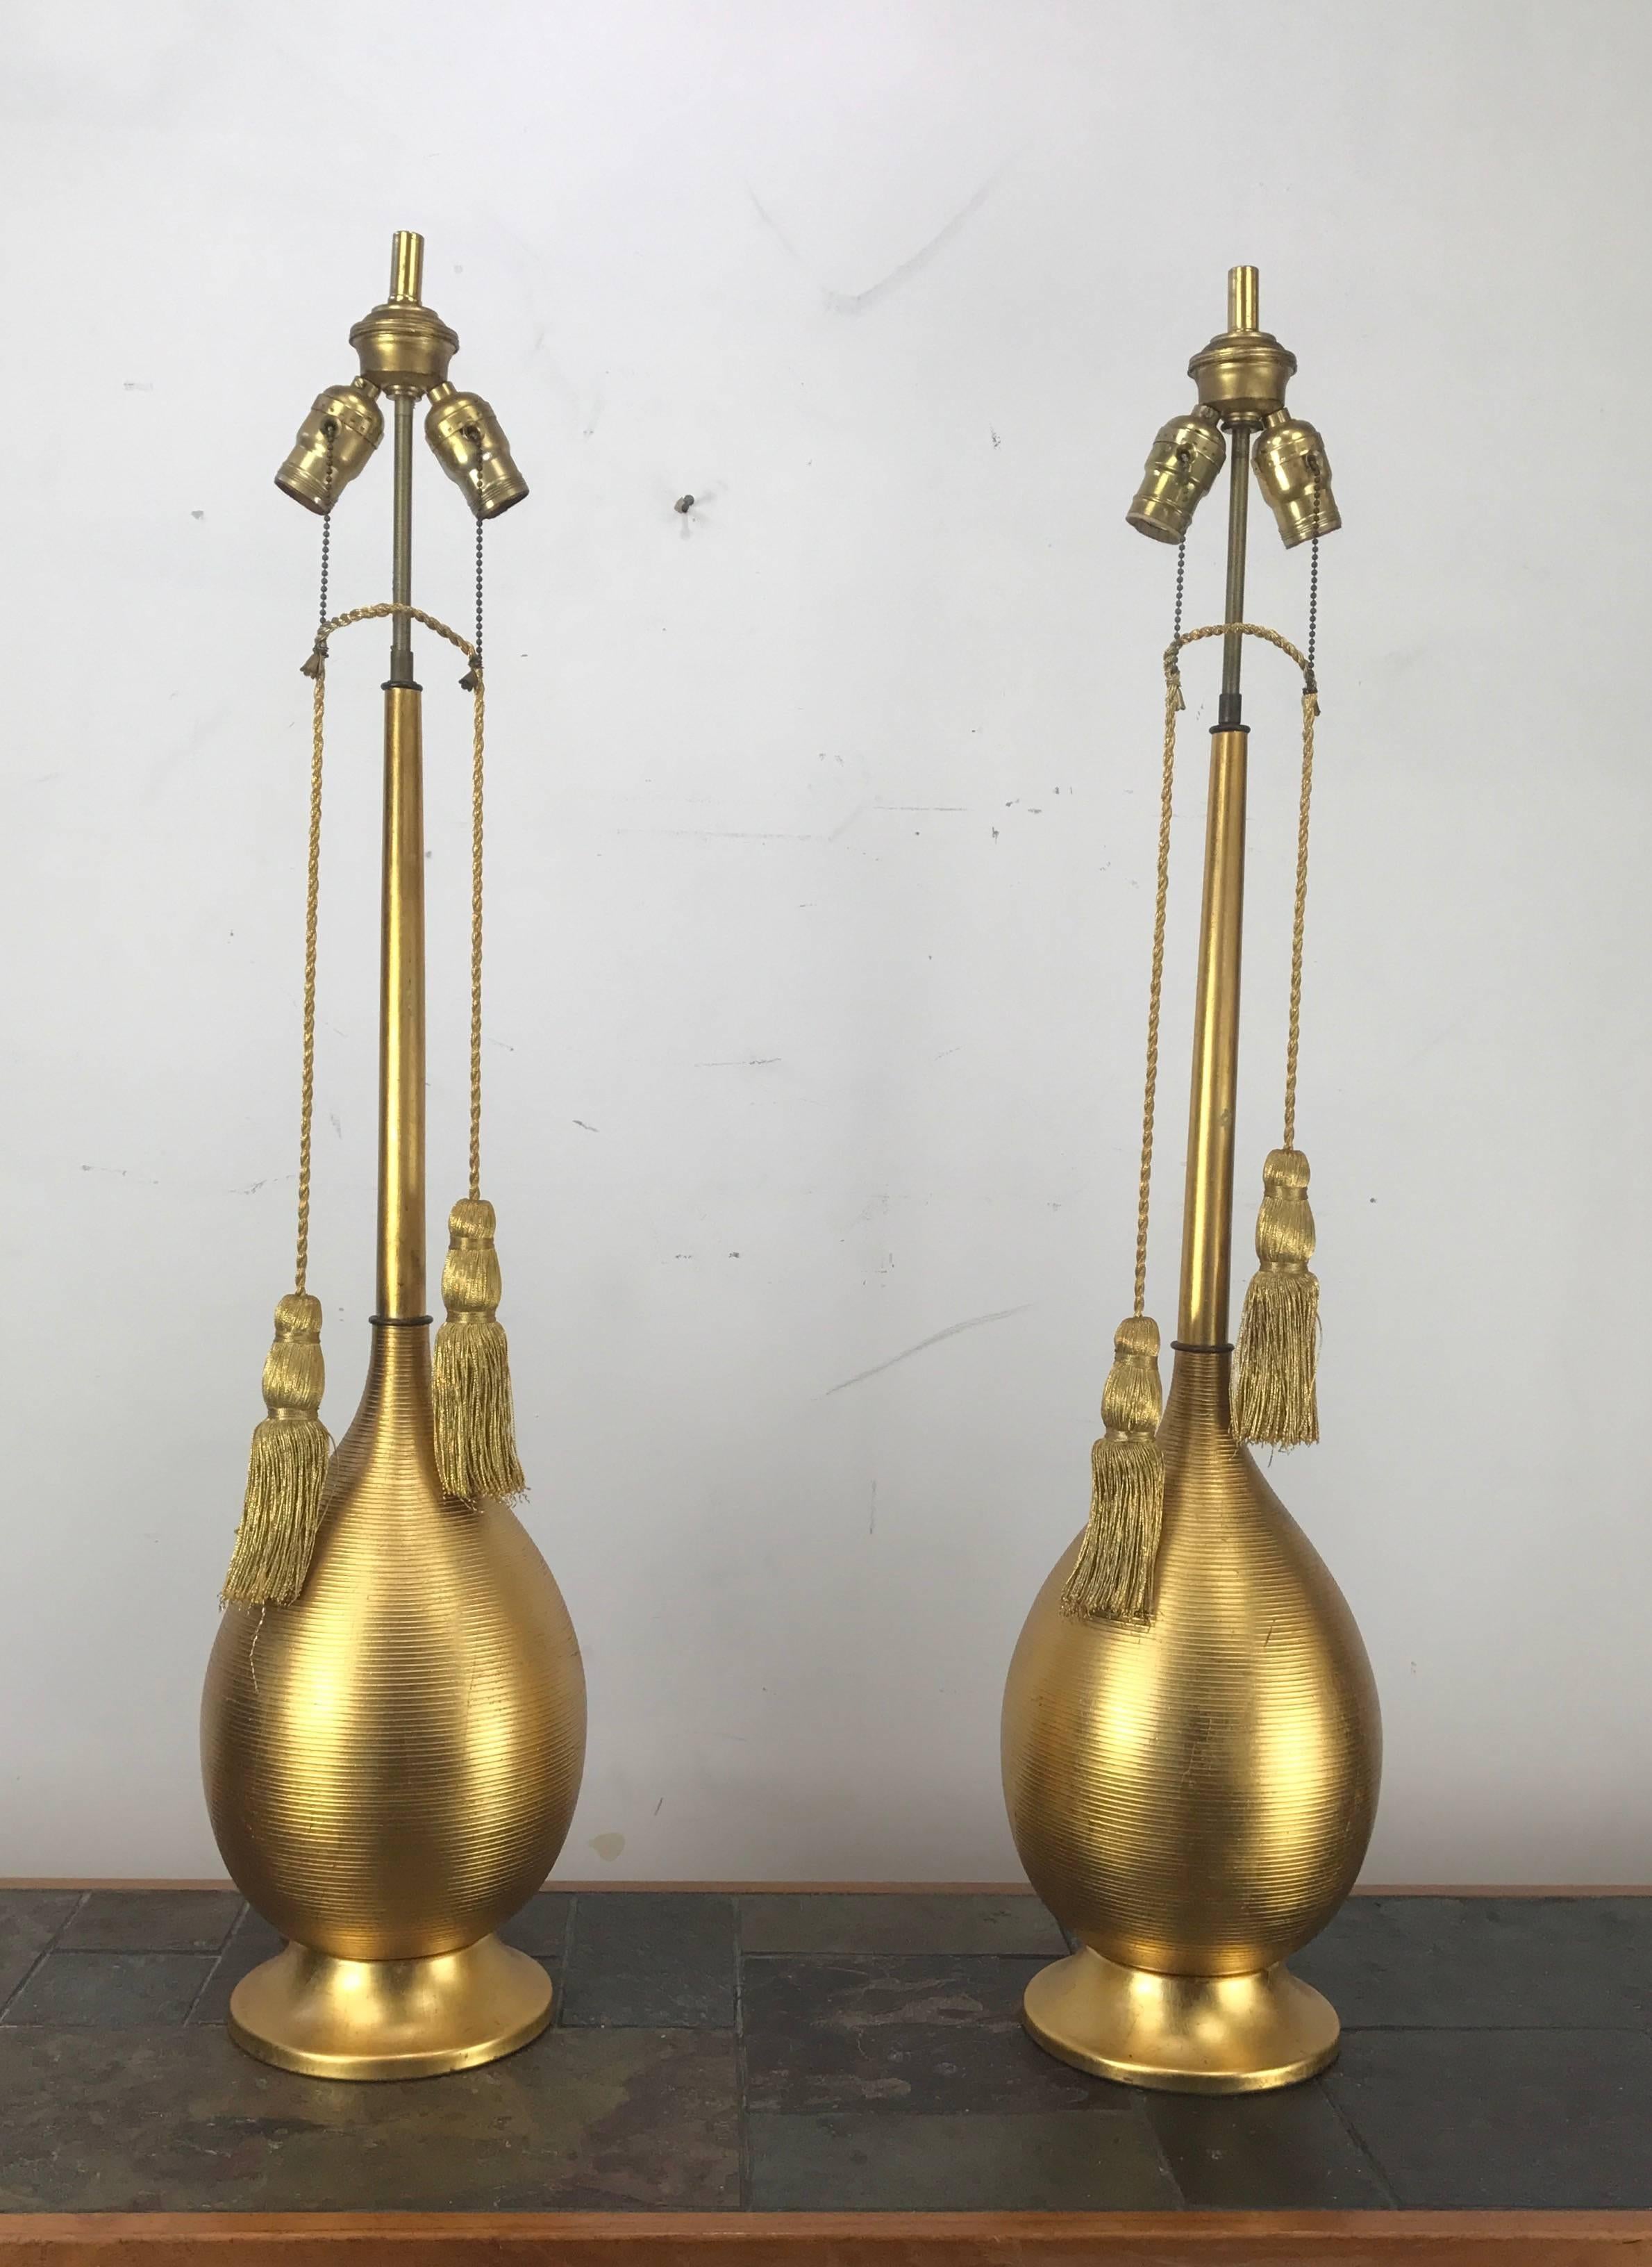 Classic Mid-Century Modern gilded ribbed metal table lamps, original rope tassel pull chain on/off switch, Wonderful bulbous form, graceful tapered standard, Great style, patina and proportion.